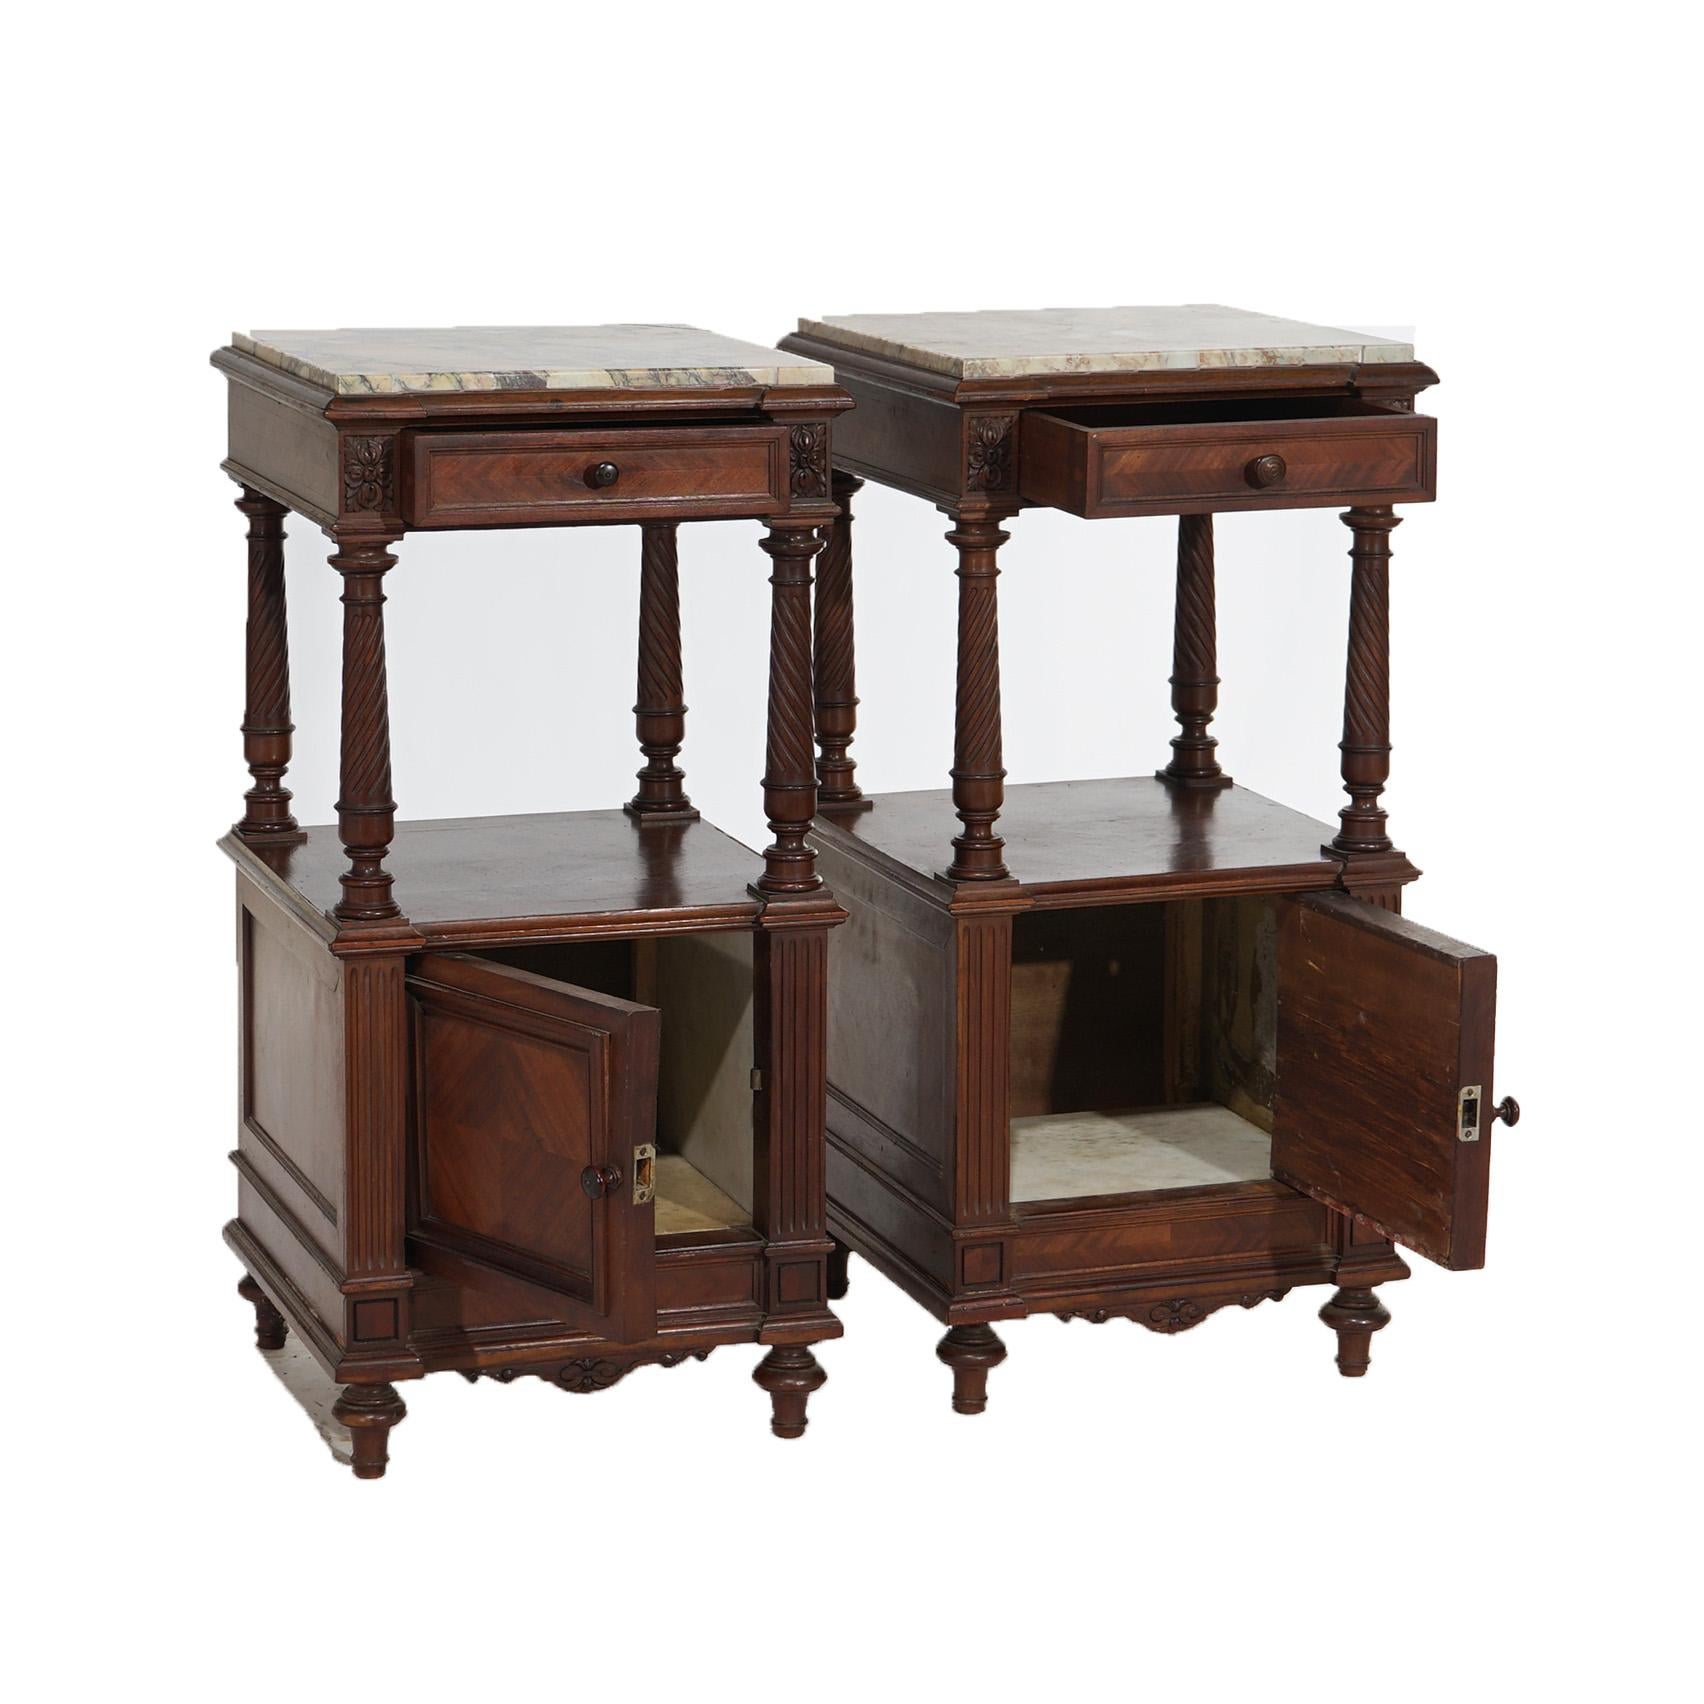 An antique pair of French Louis XVI style end stands offer kingwood and walnut construction with specimen marble tops over caser with single drawer, rope twist columns and lower blind cabinet, c1910

Measures- 32.75''H x 15.5''W x 16''D